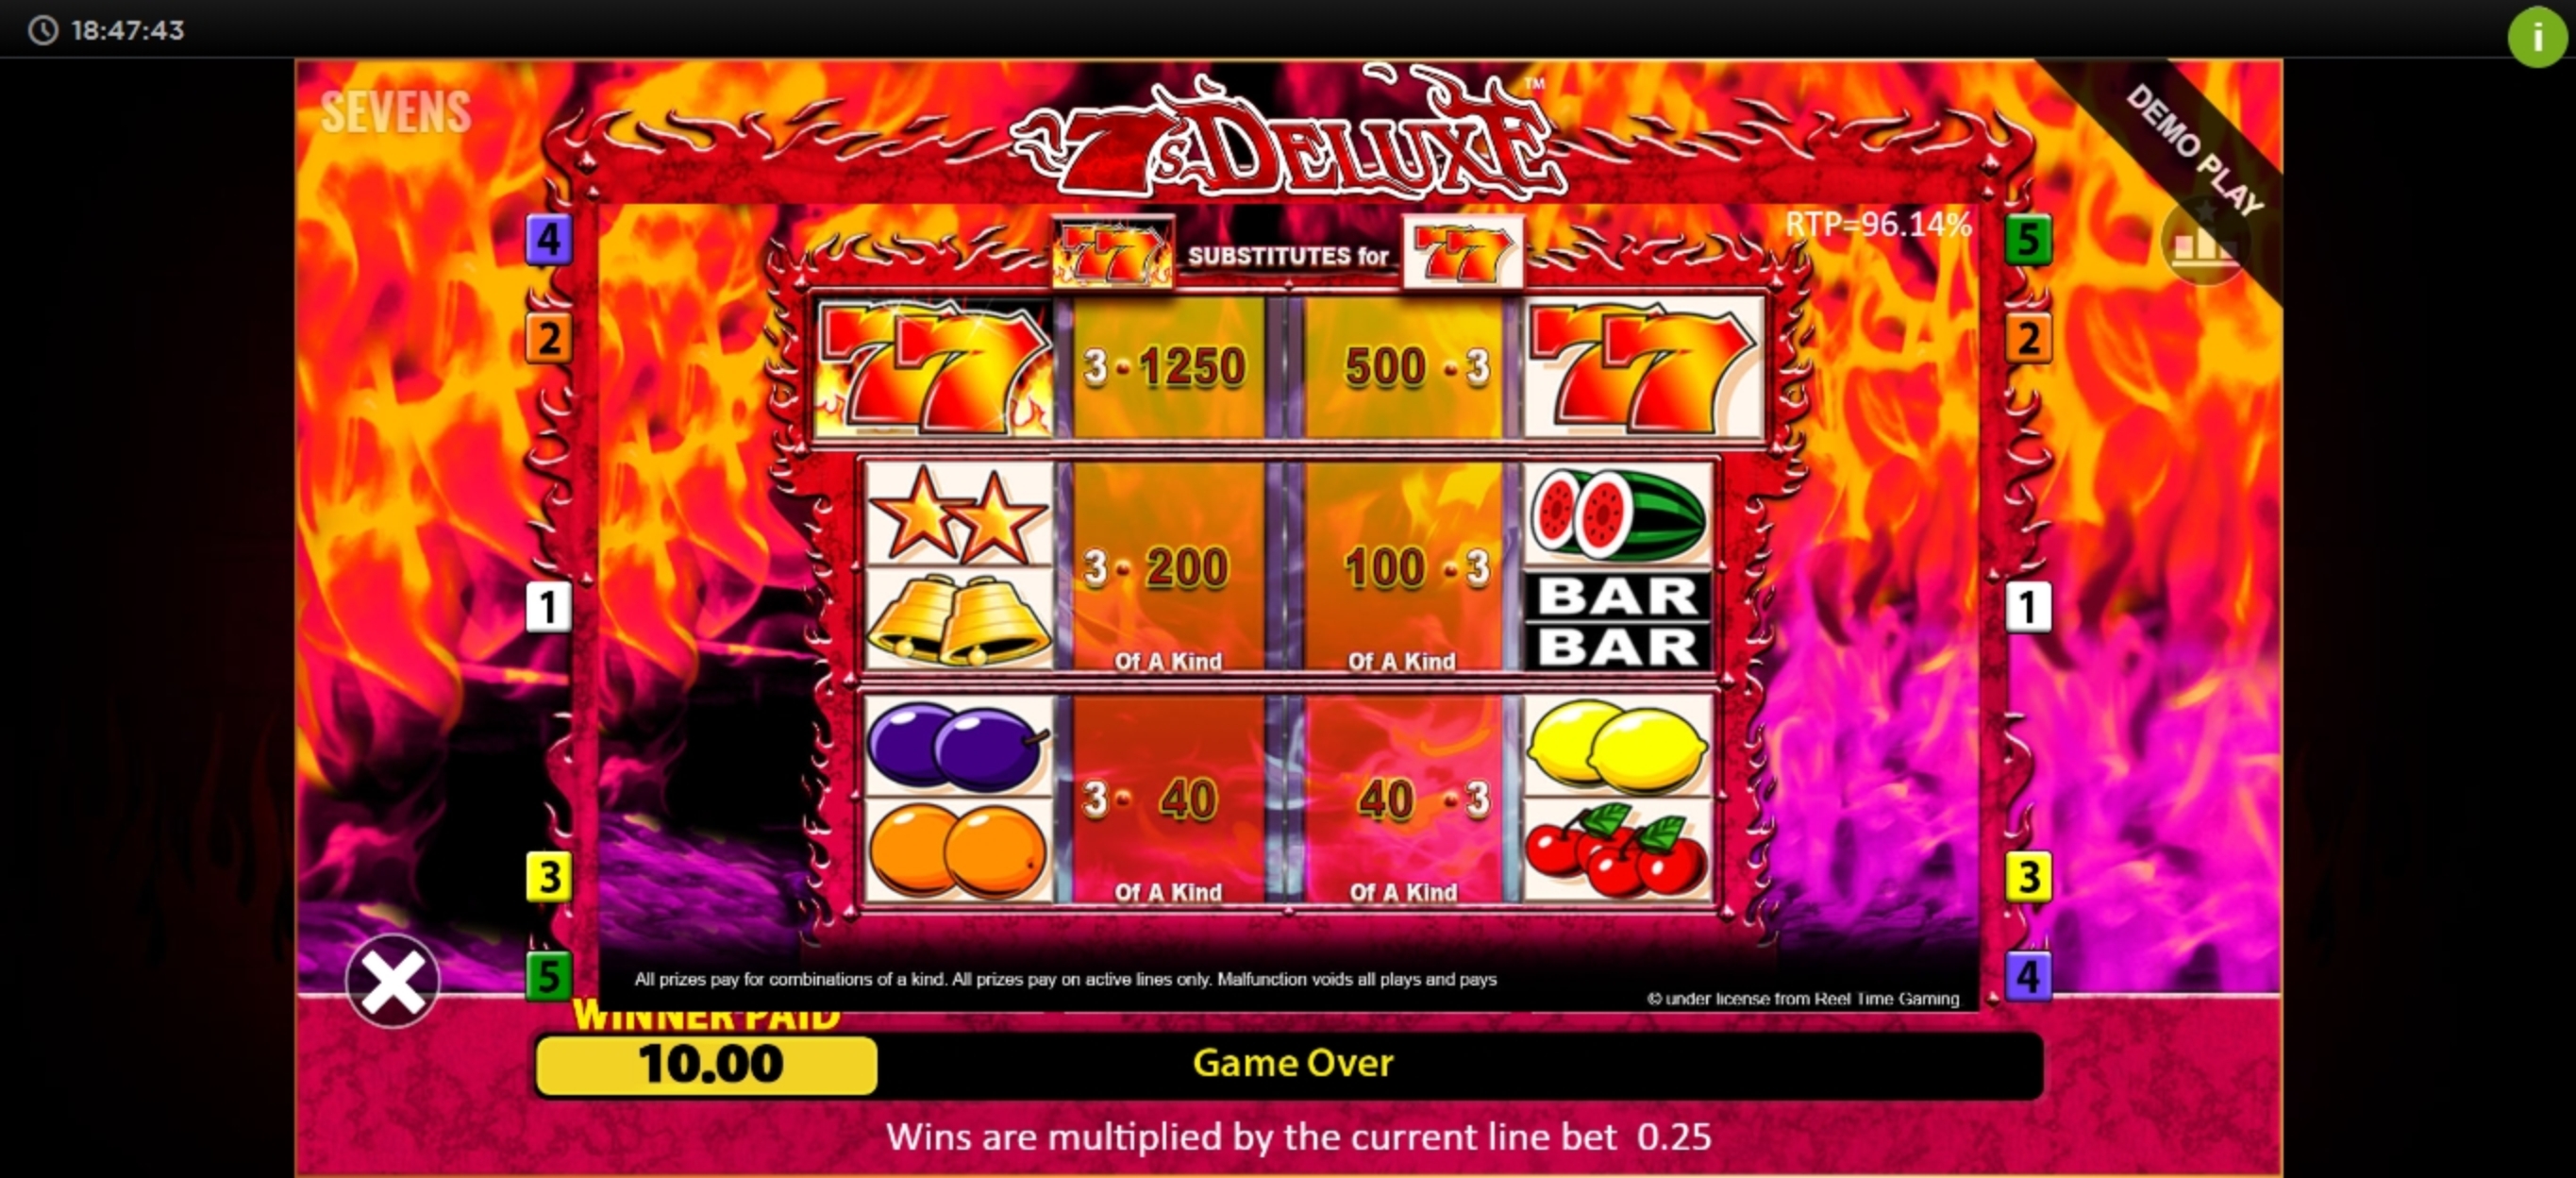 Info of 7s Deluxe Slot Game by Reel Time Gaming